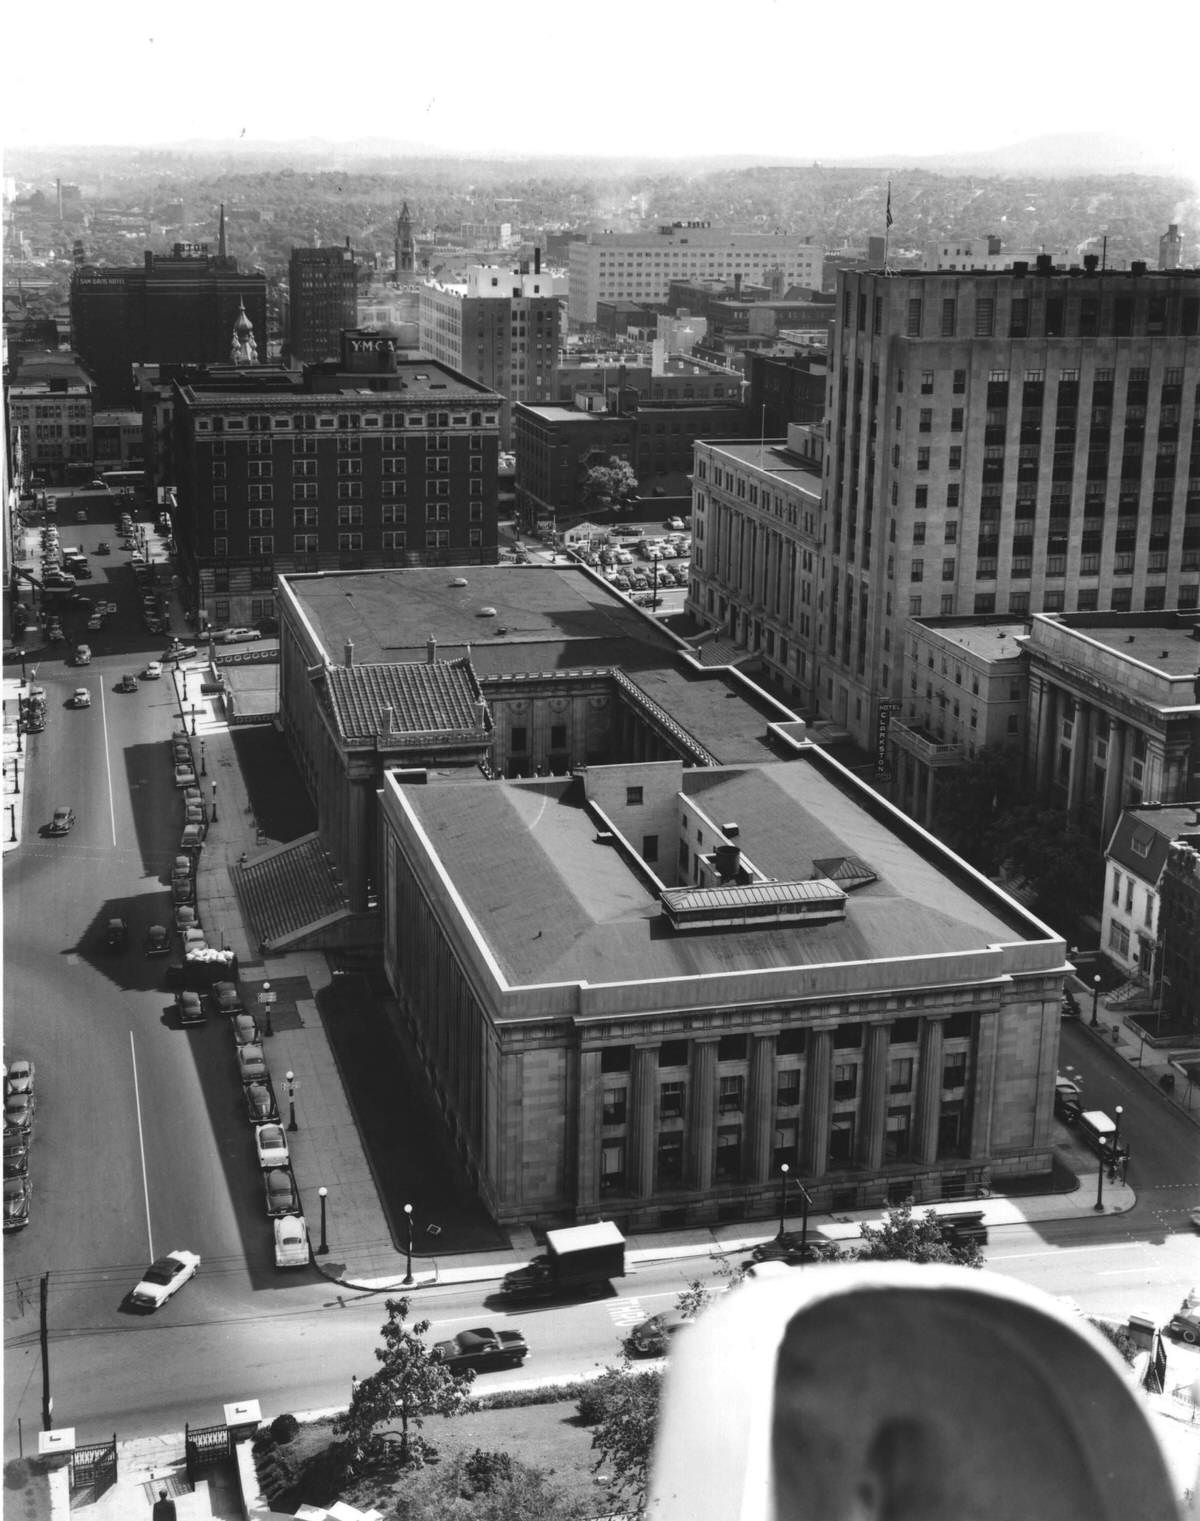 Nashville, as seen from the top of the State Capitol, 1952.